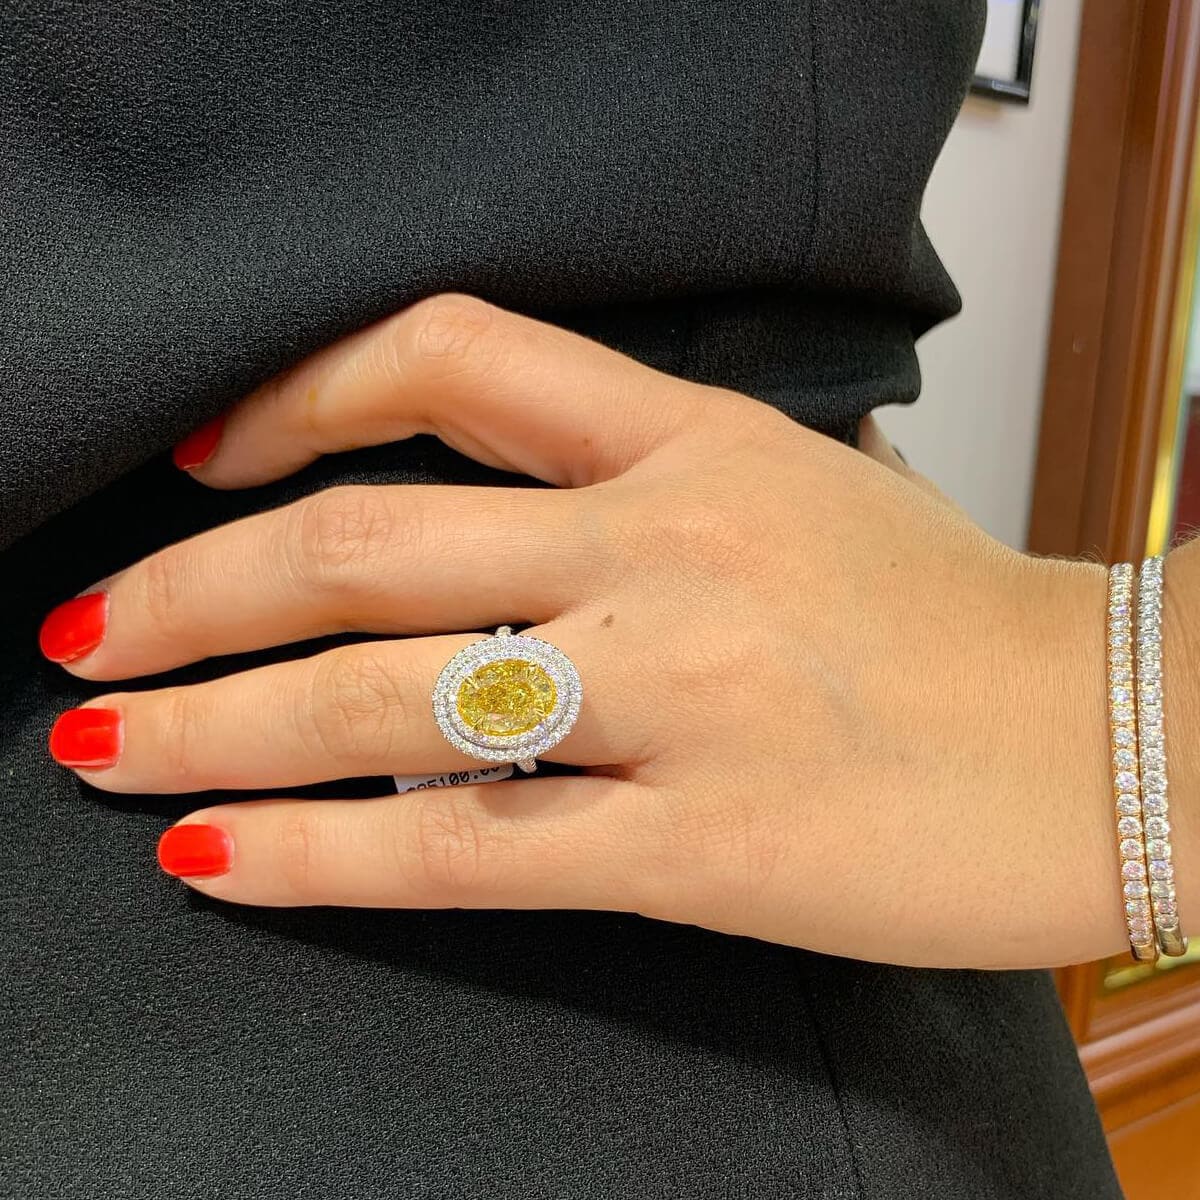 fancy yellow diamond engagement ring on the woman's ring finger